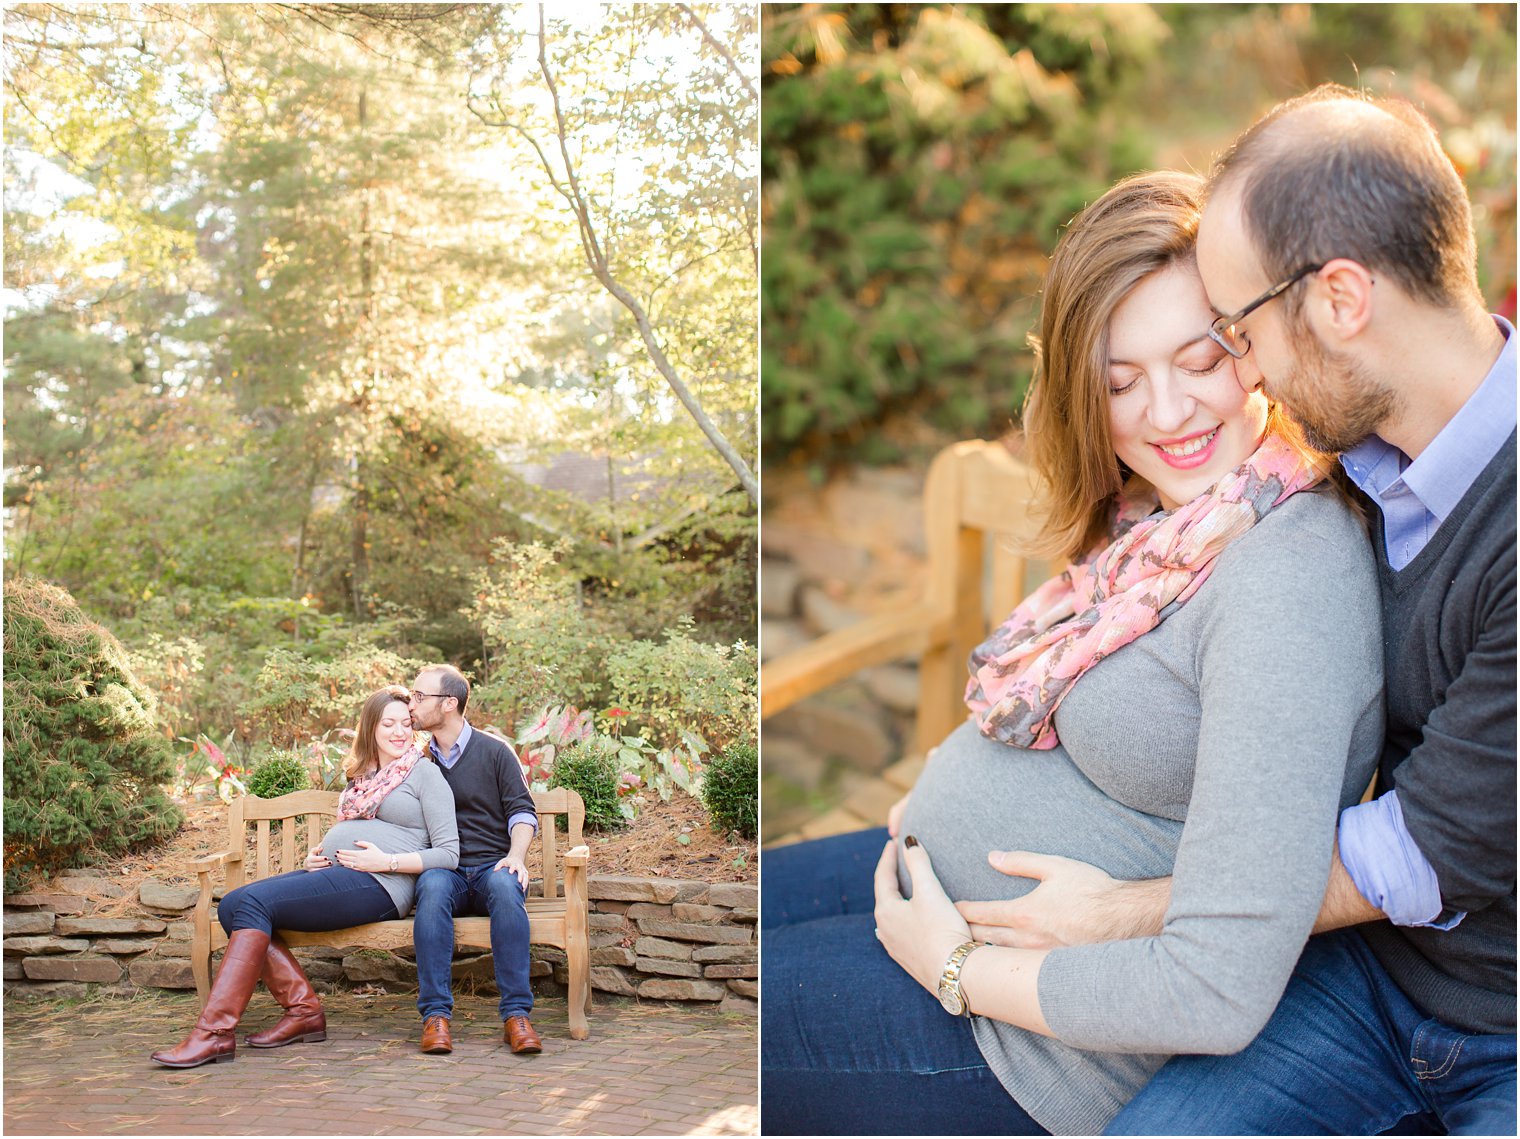 Classic and timeless maternity photos